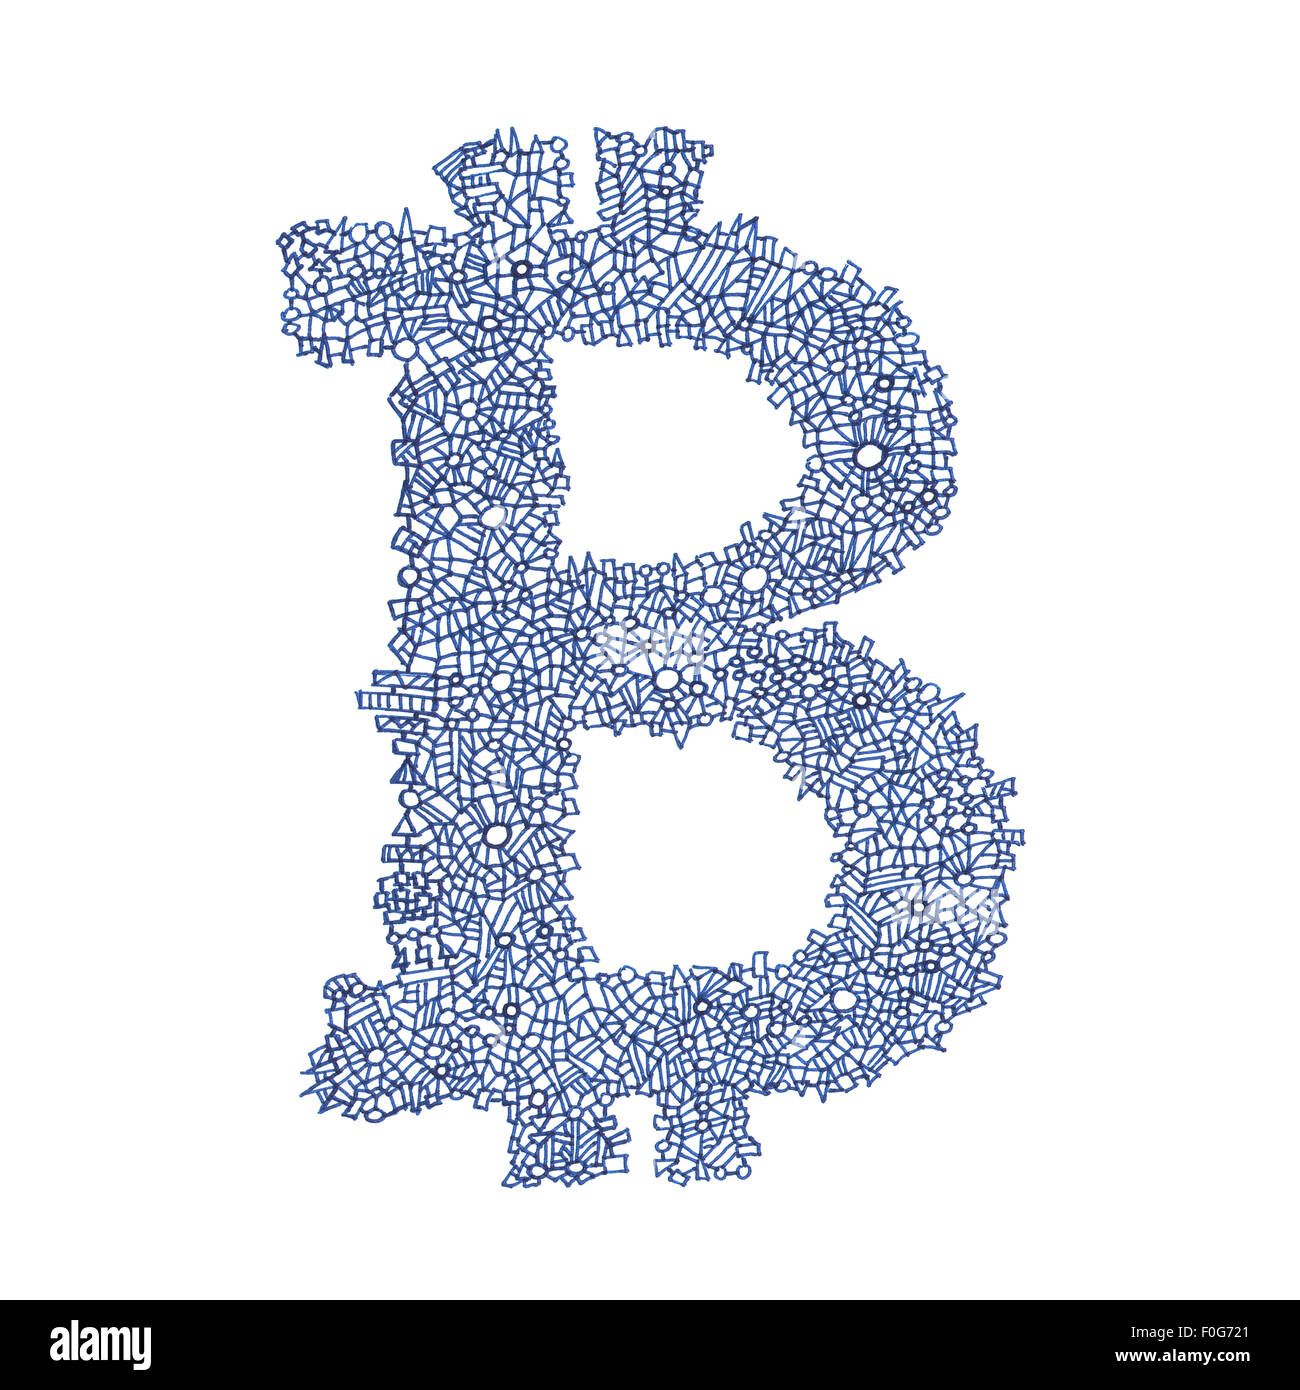 Bitcoin hand-drawn symbol of a digital decentralized crypto currency B&w Trailer Hitches Rvk3500